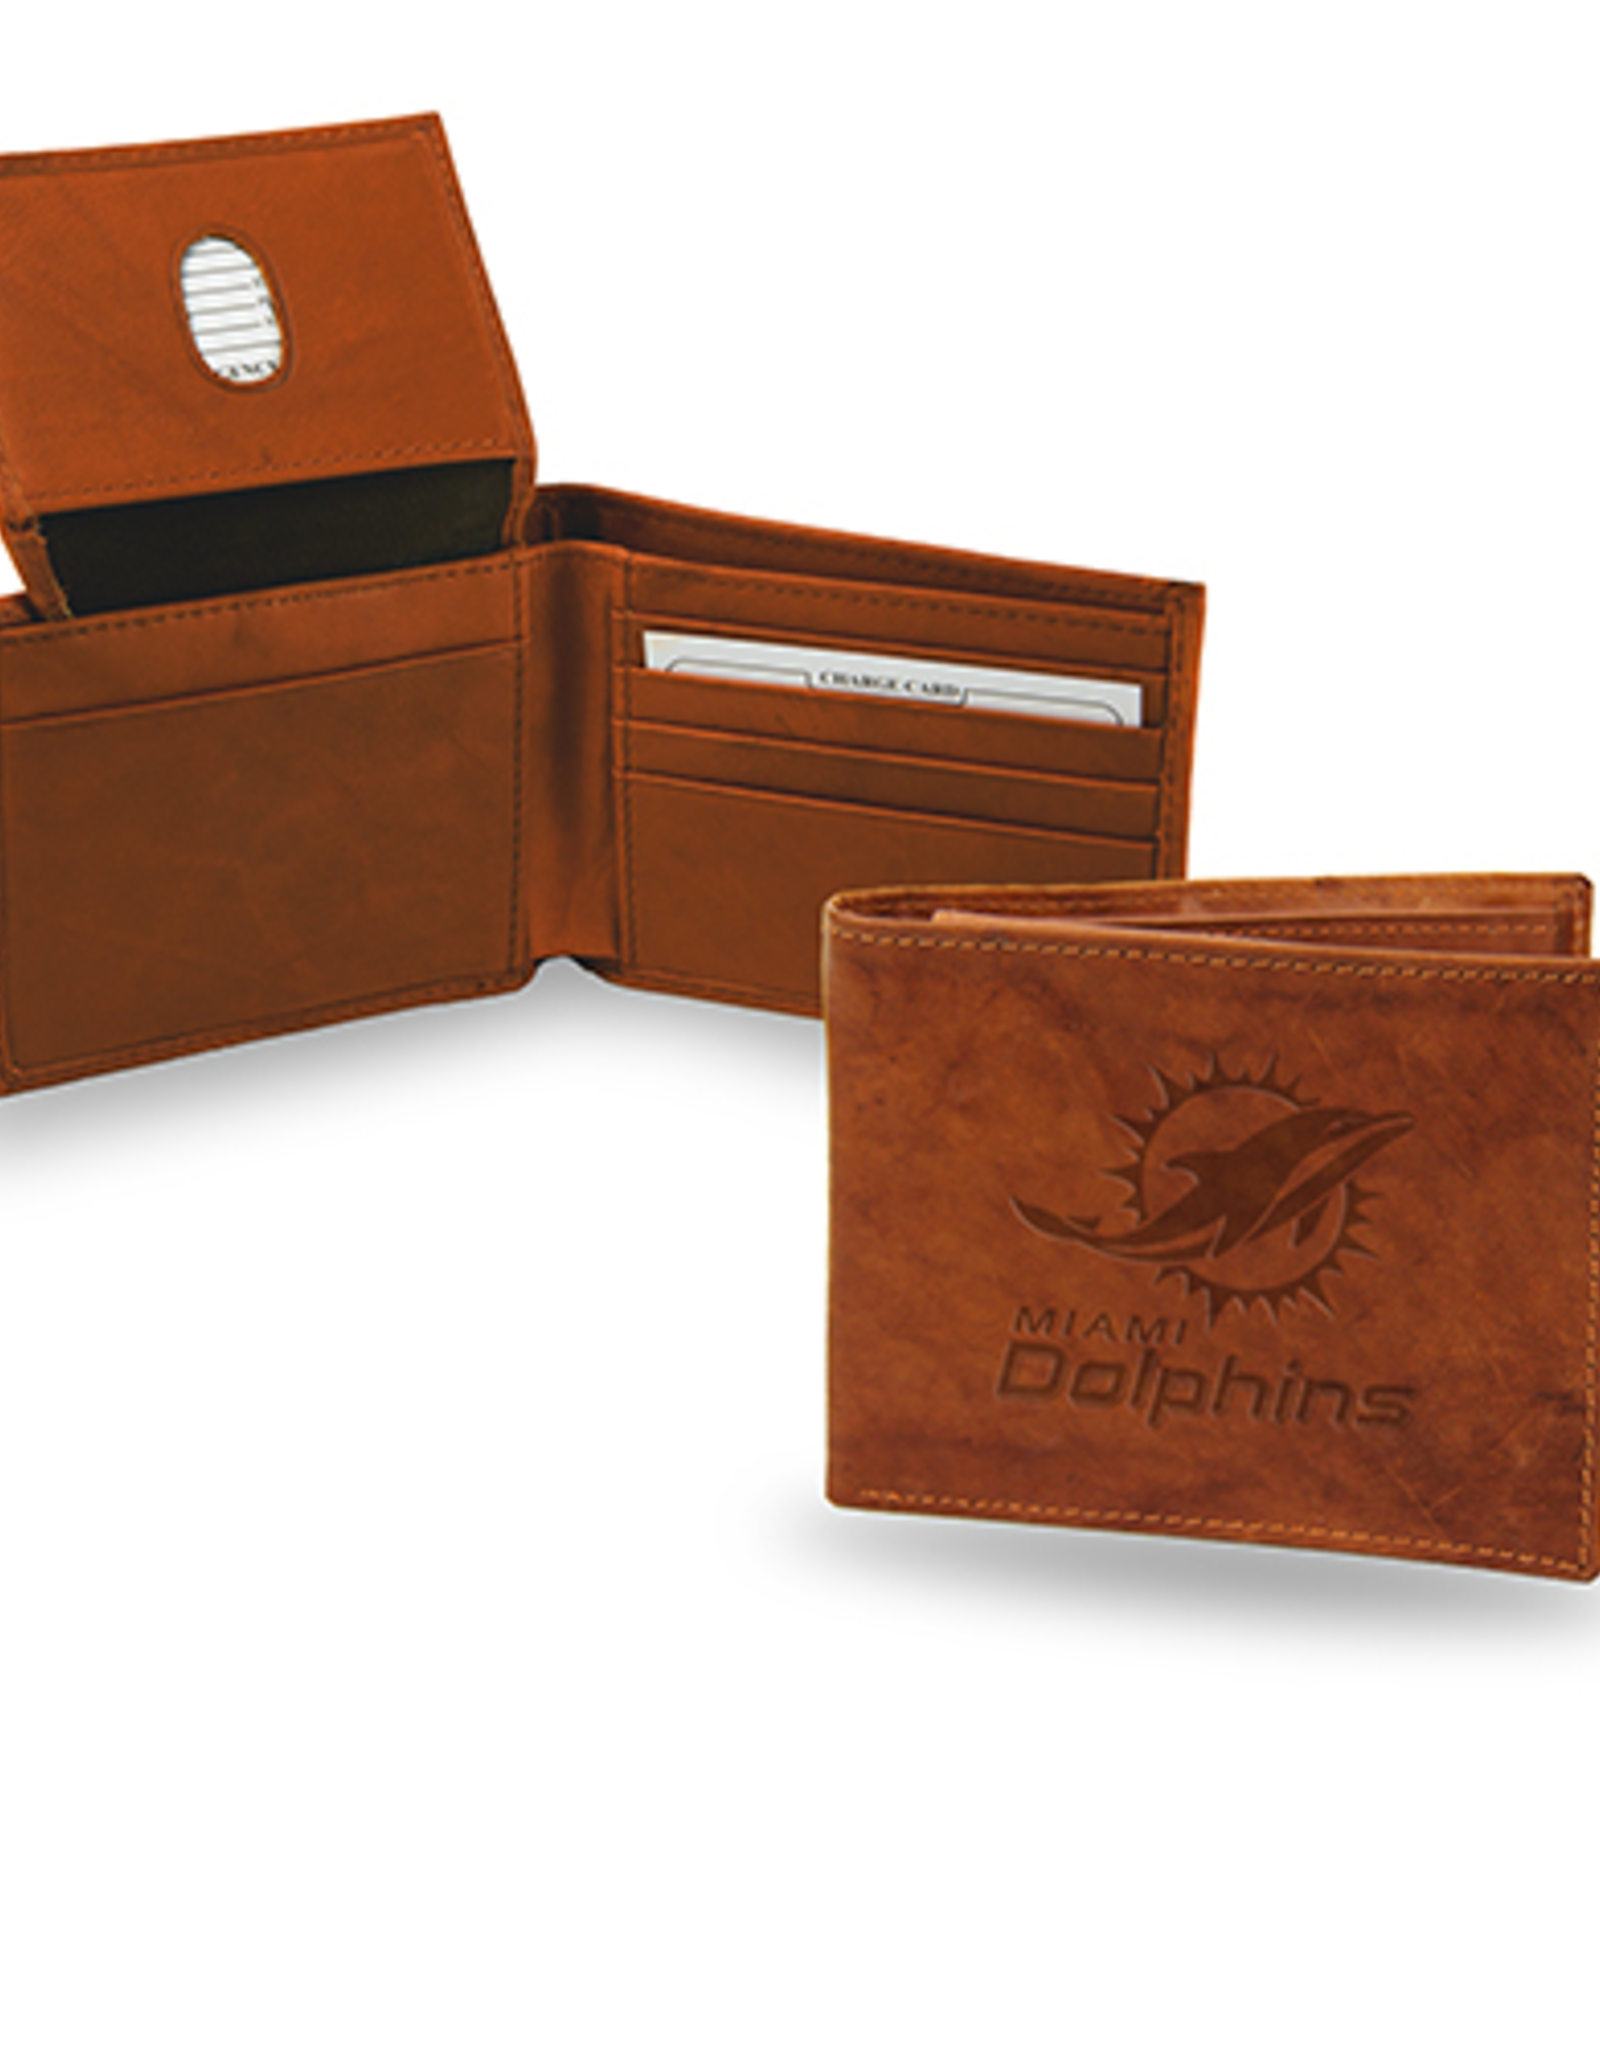 RICO INDUSTRIES Miami Dolphins Vintage Leather Billfold Wallet